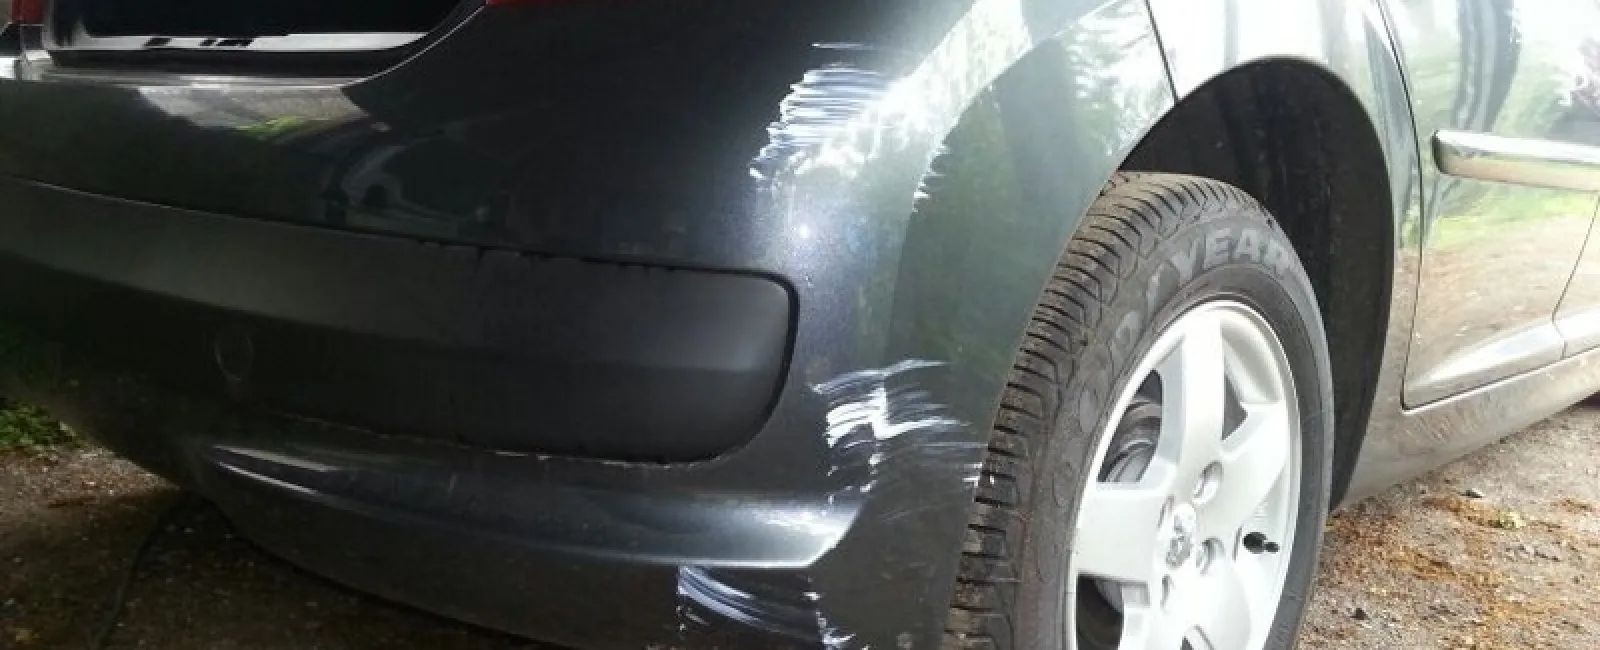 How an Automatic Car Wash Can Help Prevent Scratches